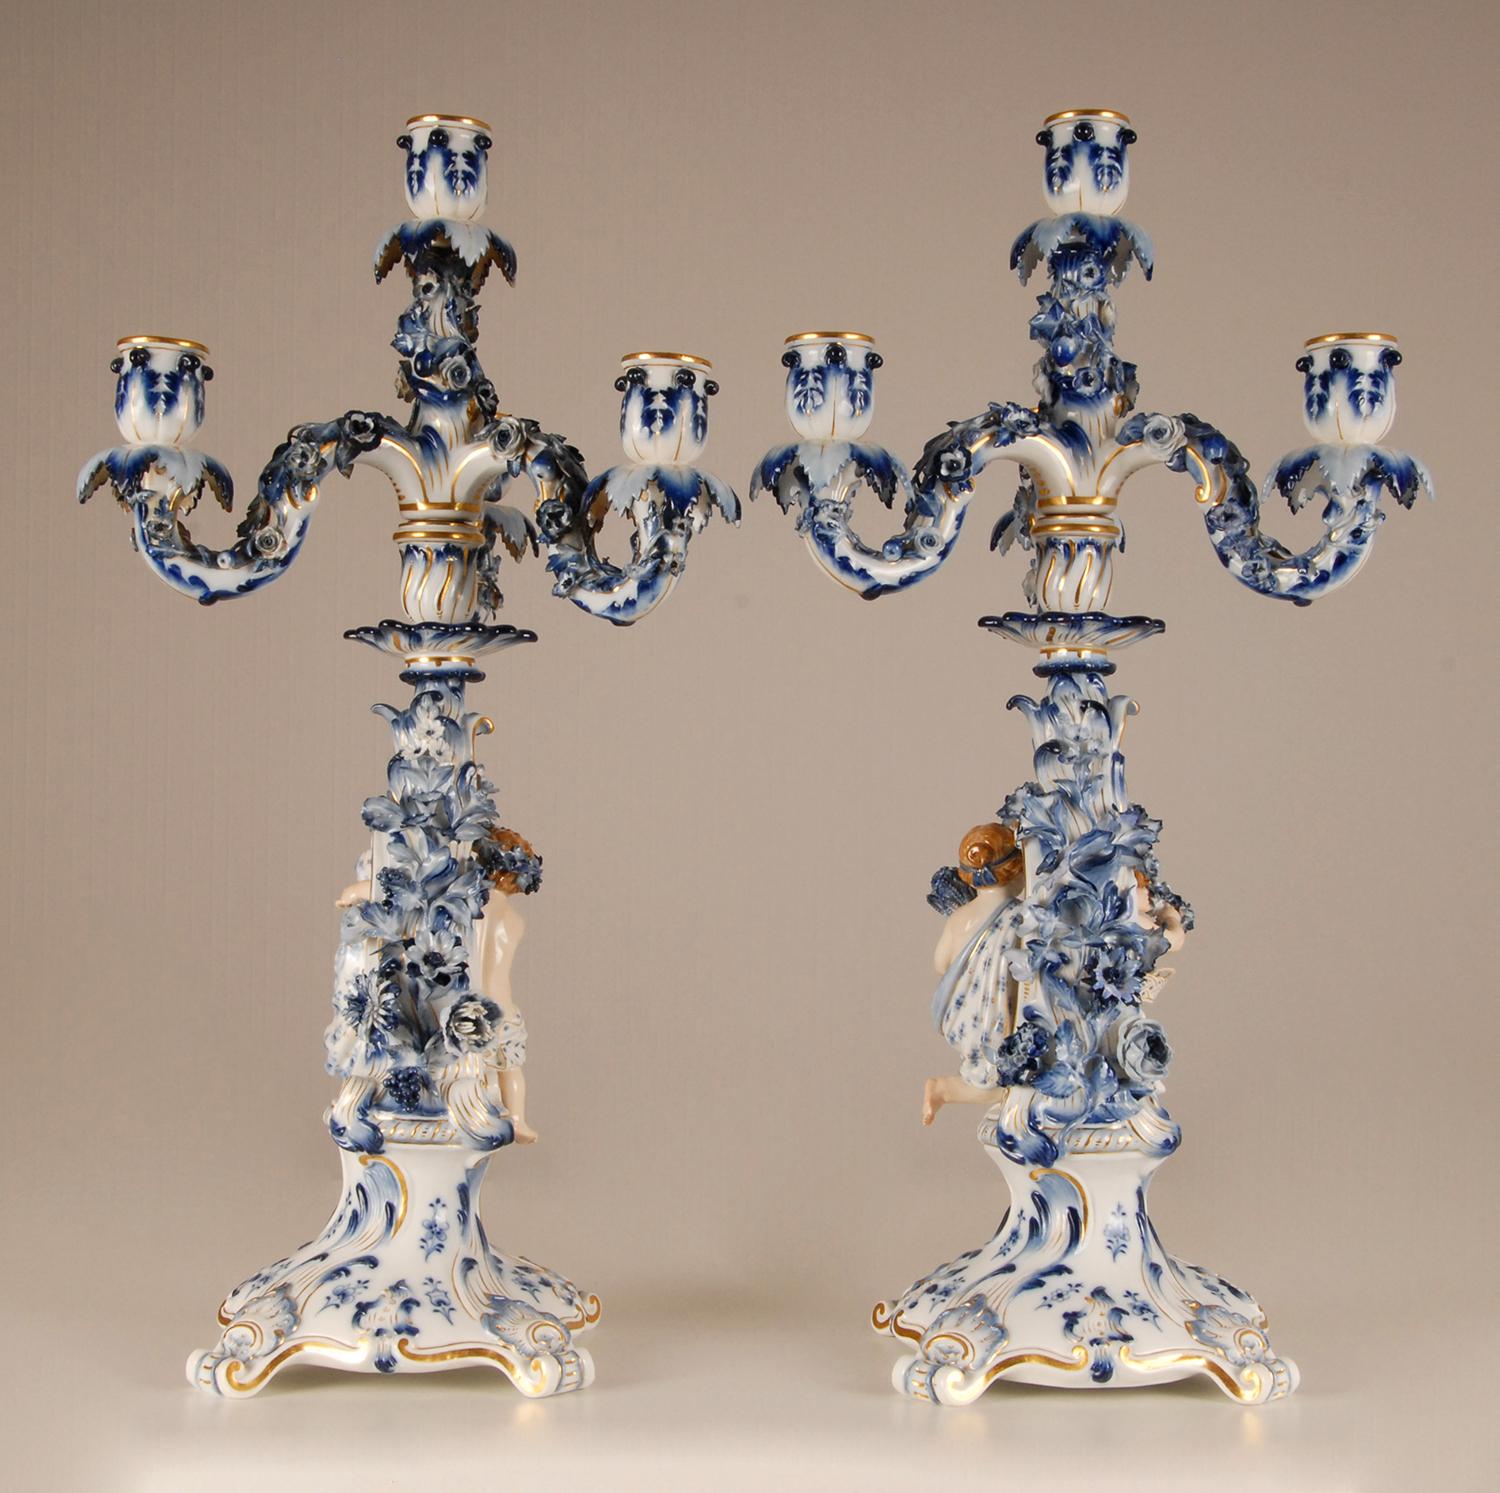 19th century Meissen Porcelain Candelabras figurine white and Blue Union, a Pair For Sale 3